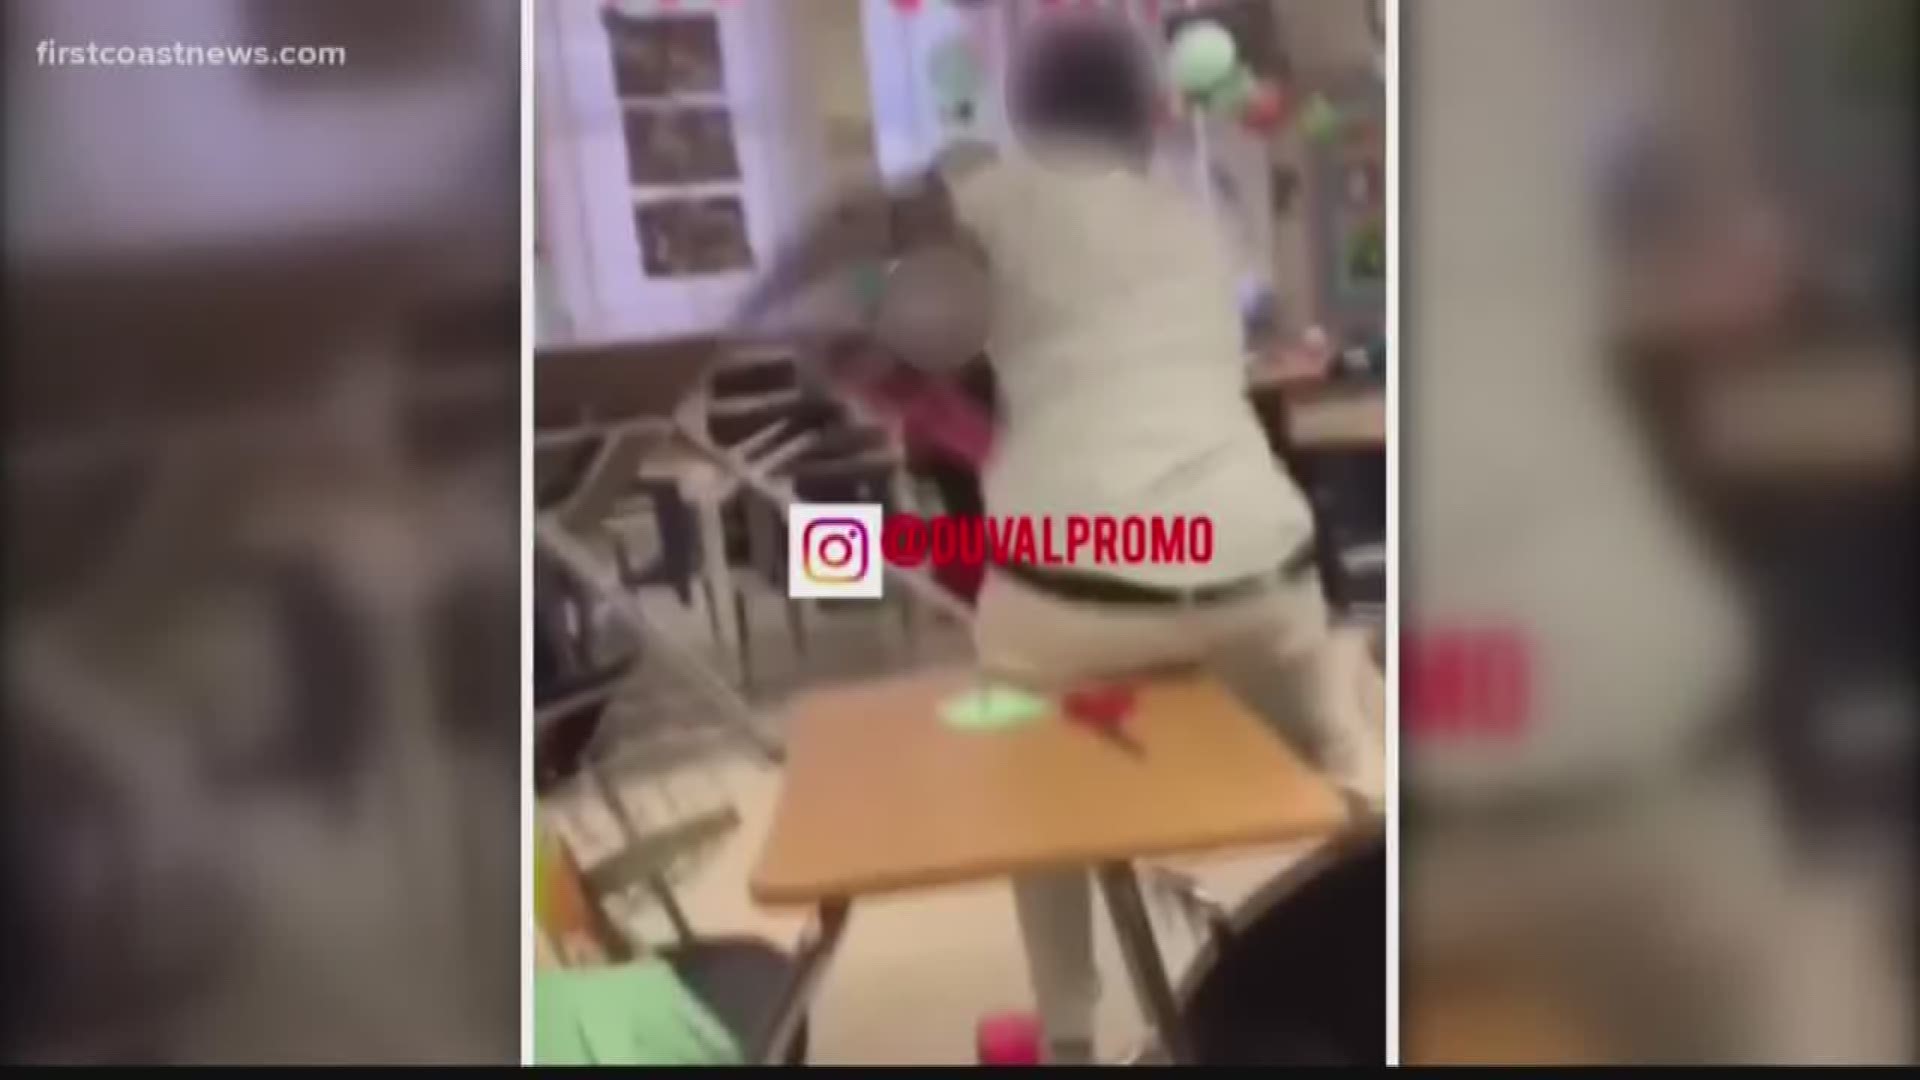 DCPS responded saying, "Every situation is unique and 'reasonable effort' can vary based on a number of factors such as the number of students involved, age of students, and the intesity of the altercation."